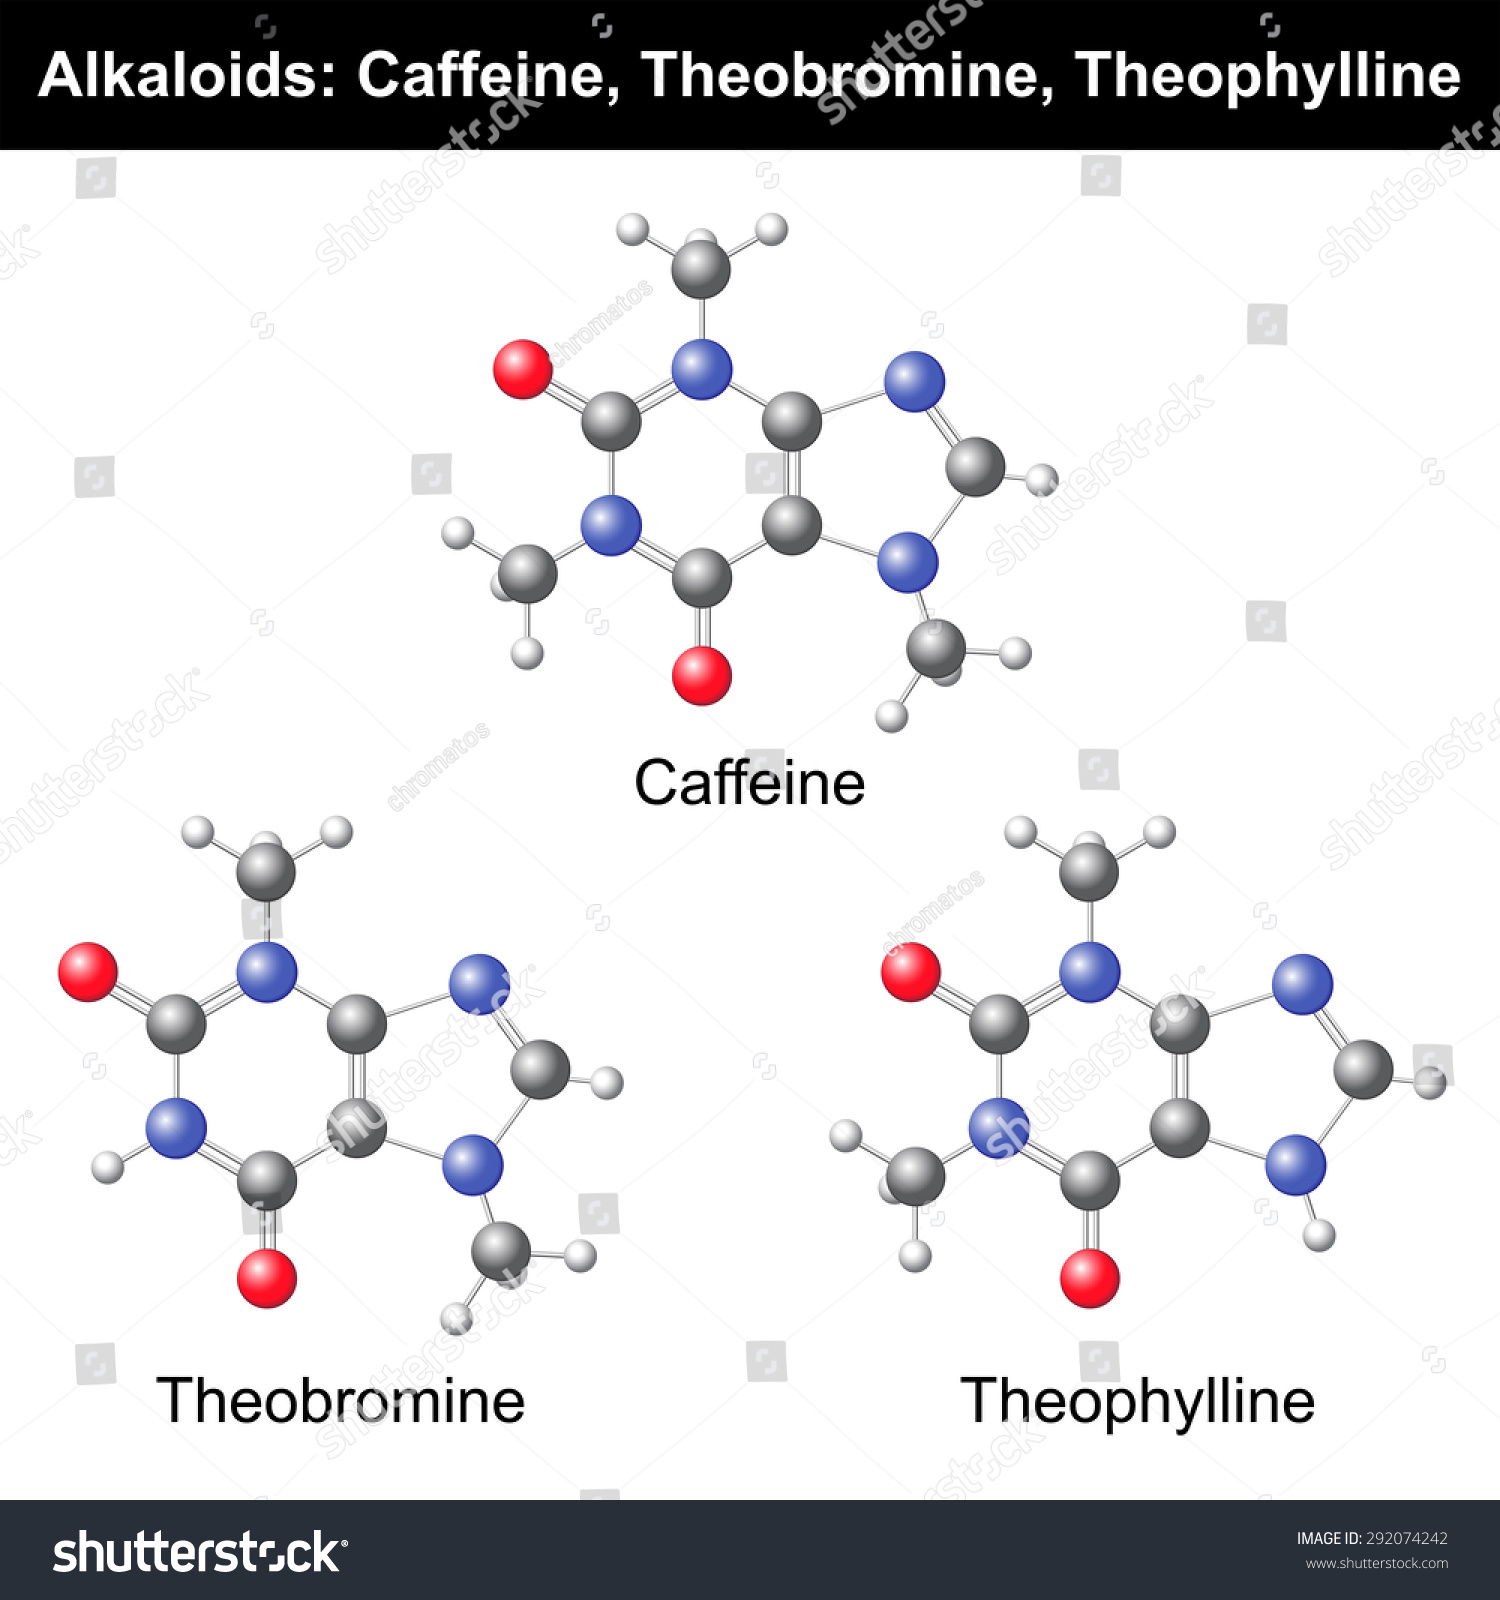 SVG of Caffeine, Theobromine and Theophylline 3d models on white background, vector, eps 8 svg